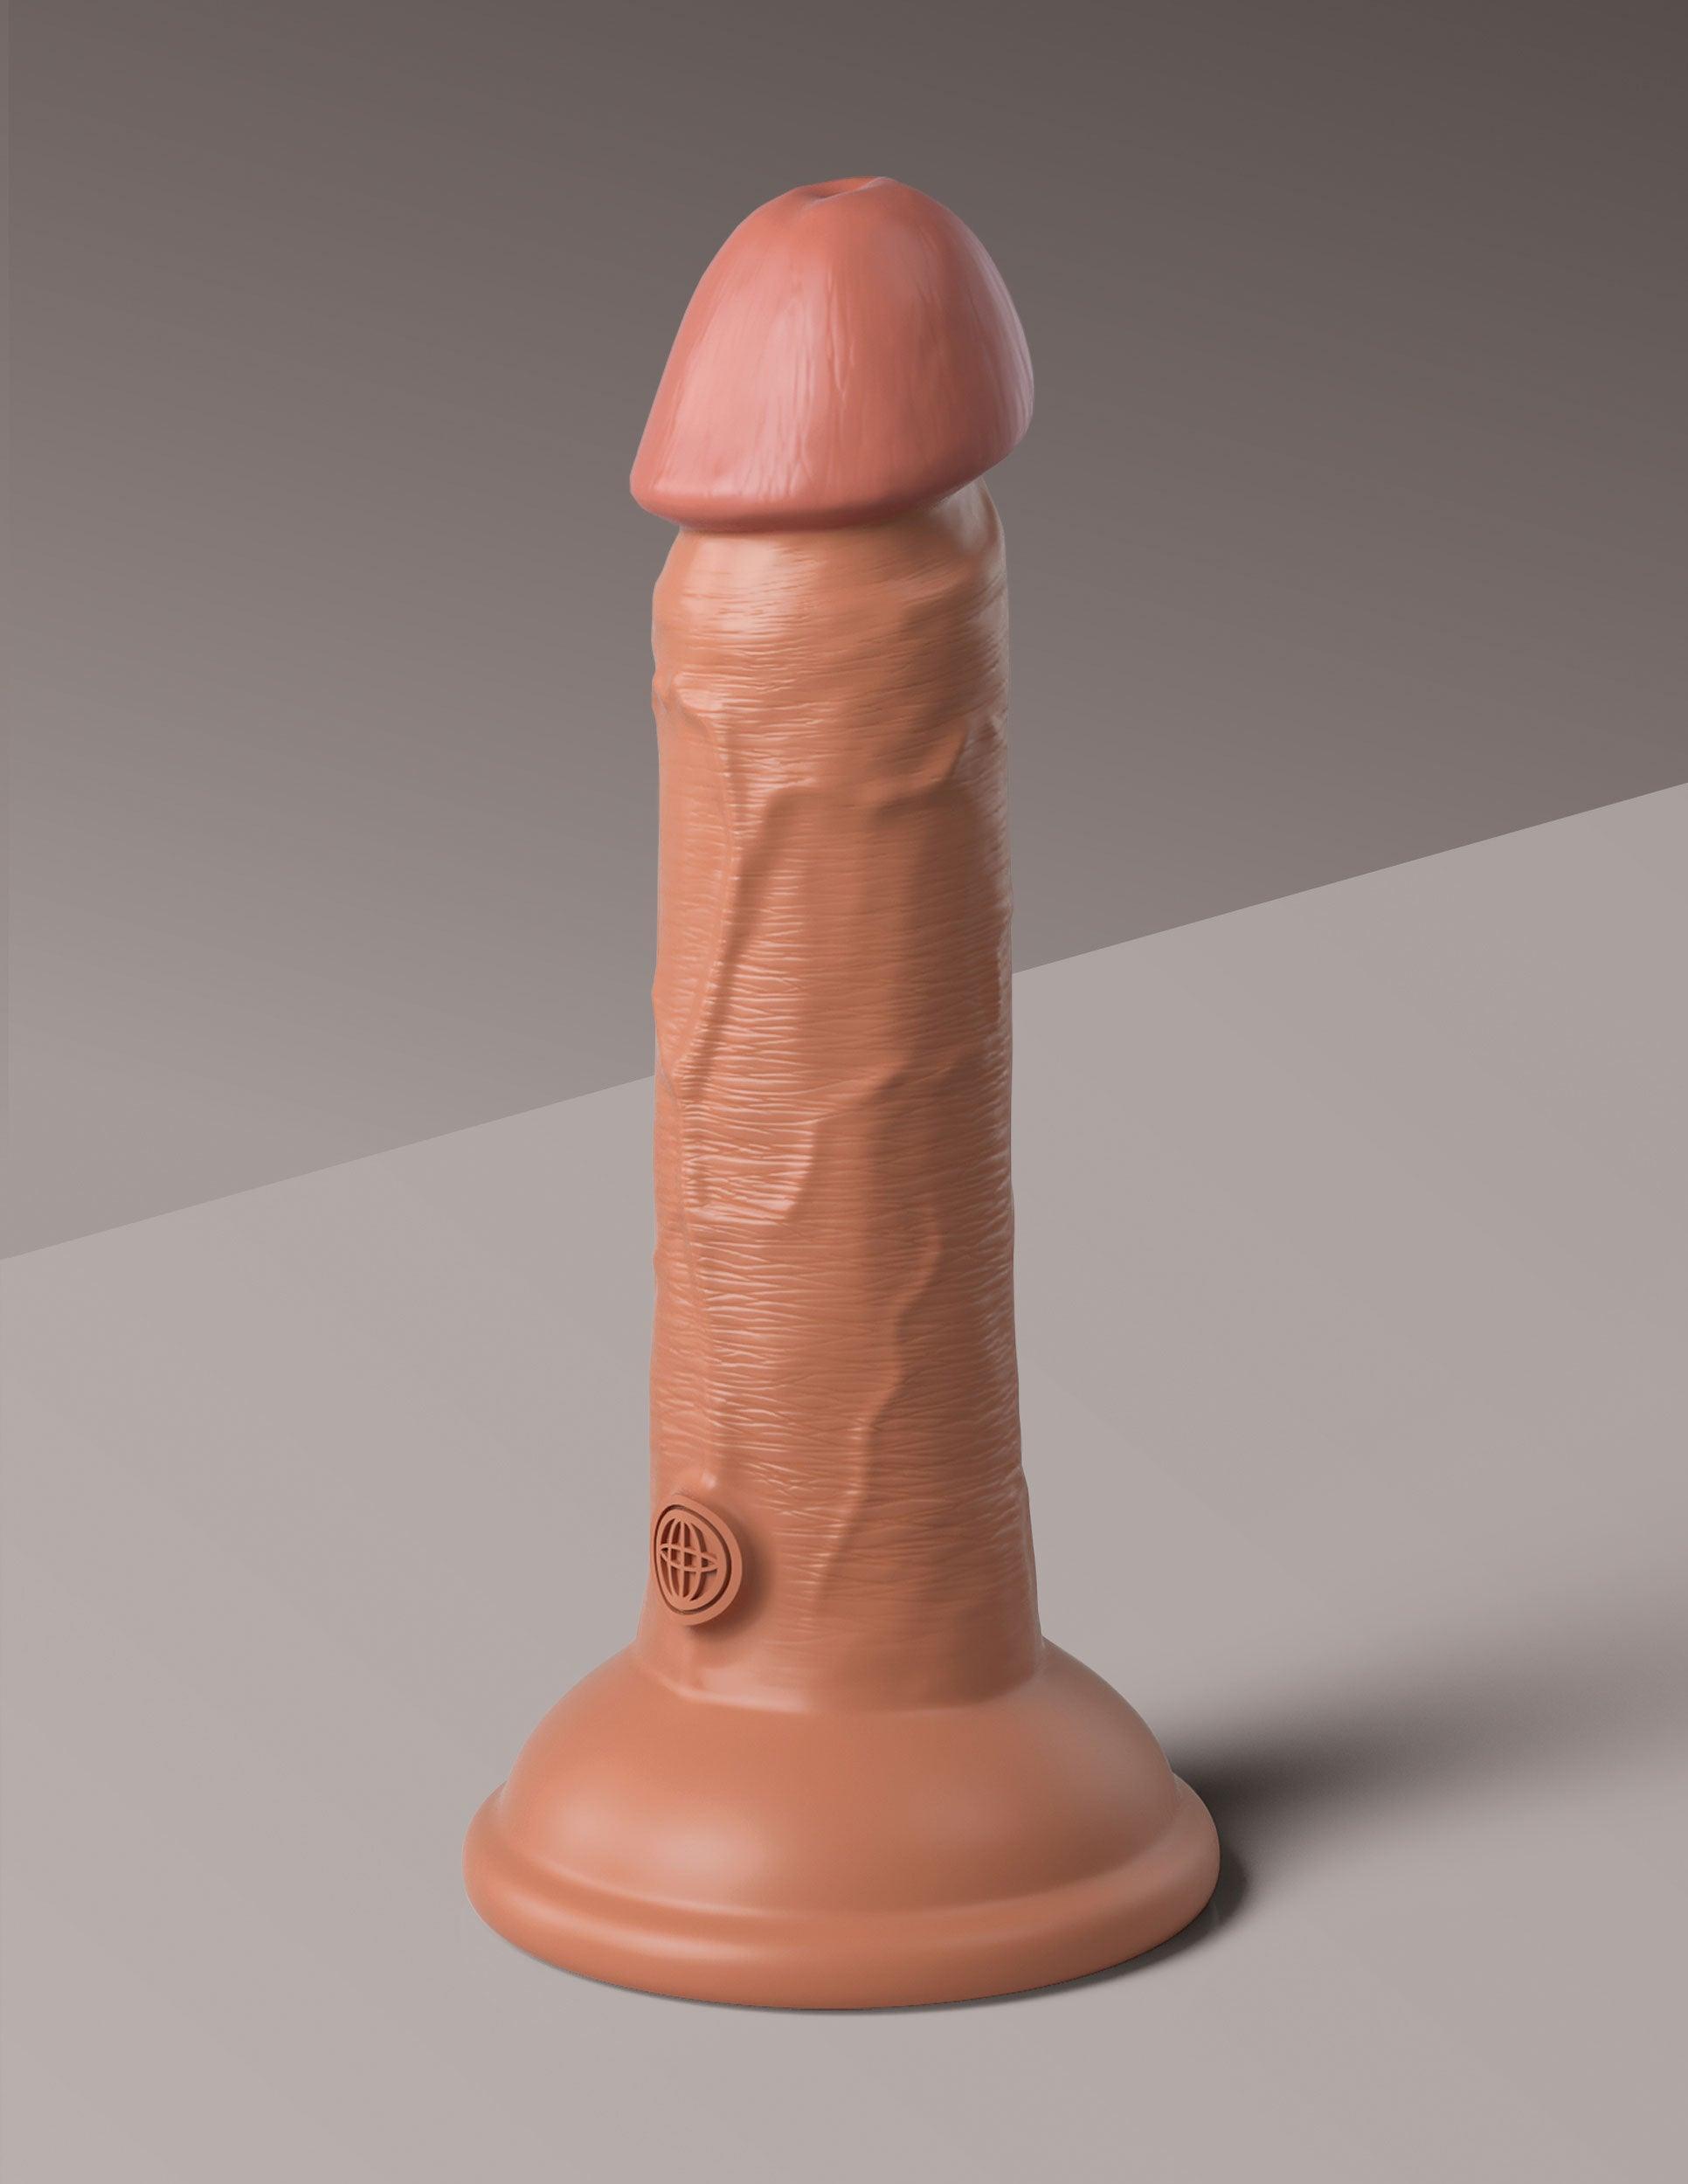 King Cock Elite 6 Inch Vibrating Silicone Dual Silicone Dual Density Cock - Tan - My Sex Toy Hub